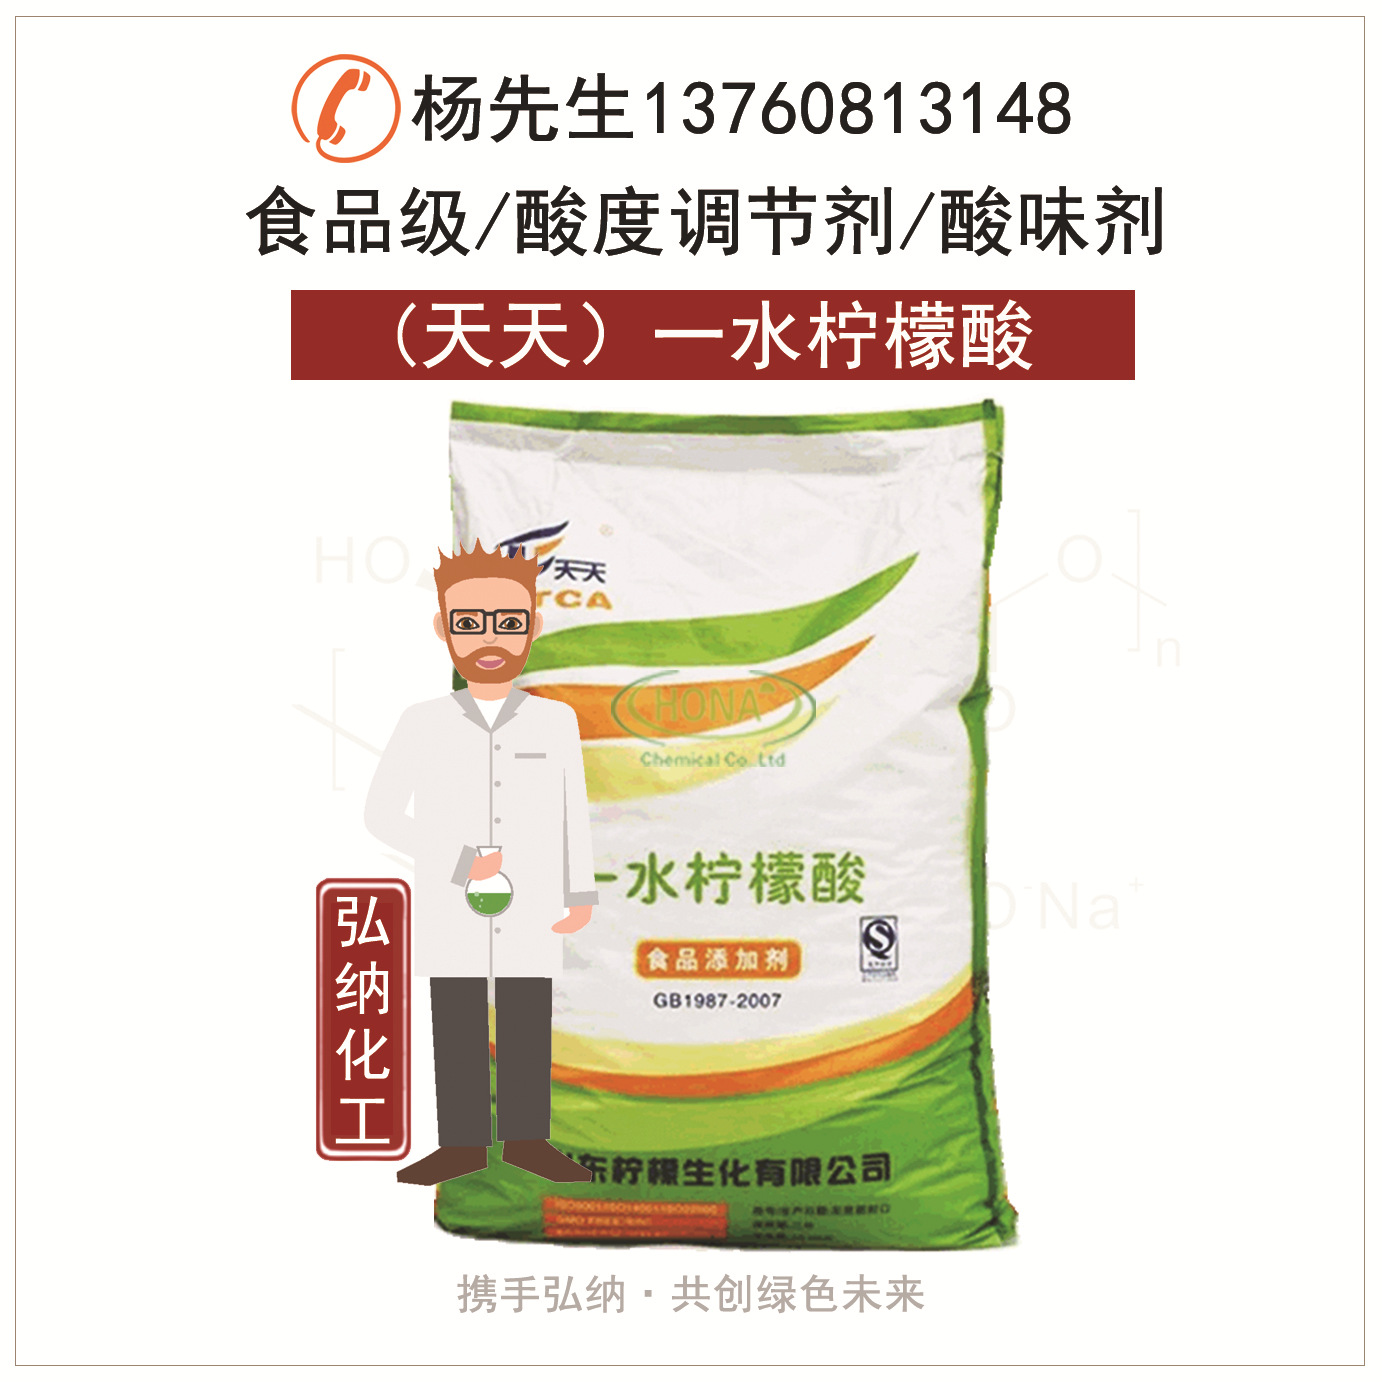 Shandong Ying Xuan/every day Citric acid monohydrate Anhydrous citric acid Food grade/Industrial grade Citrate